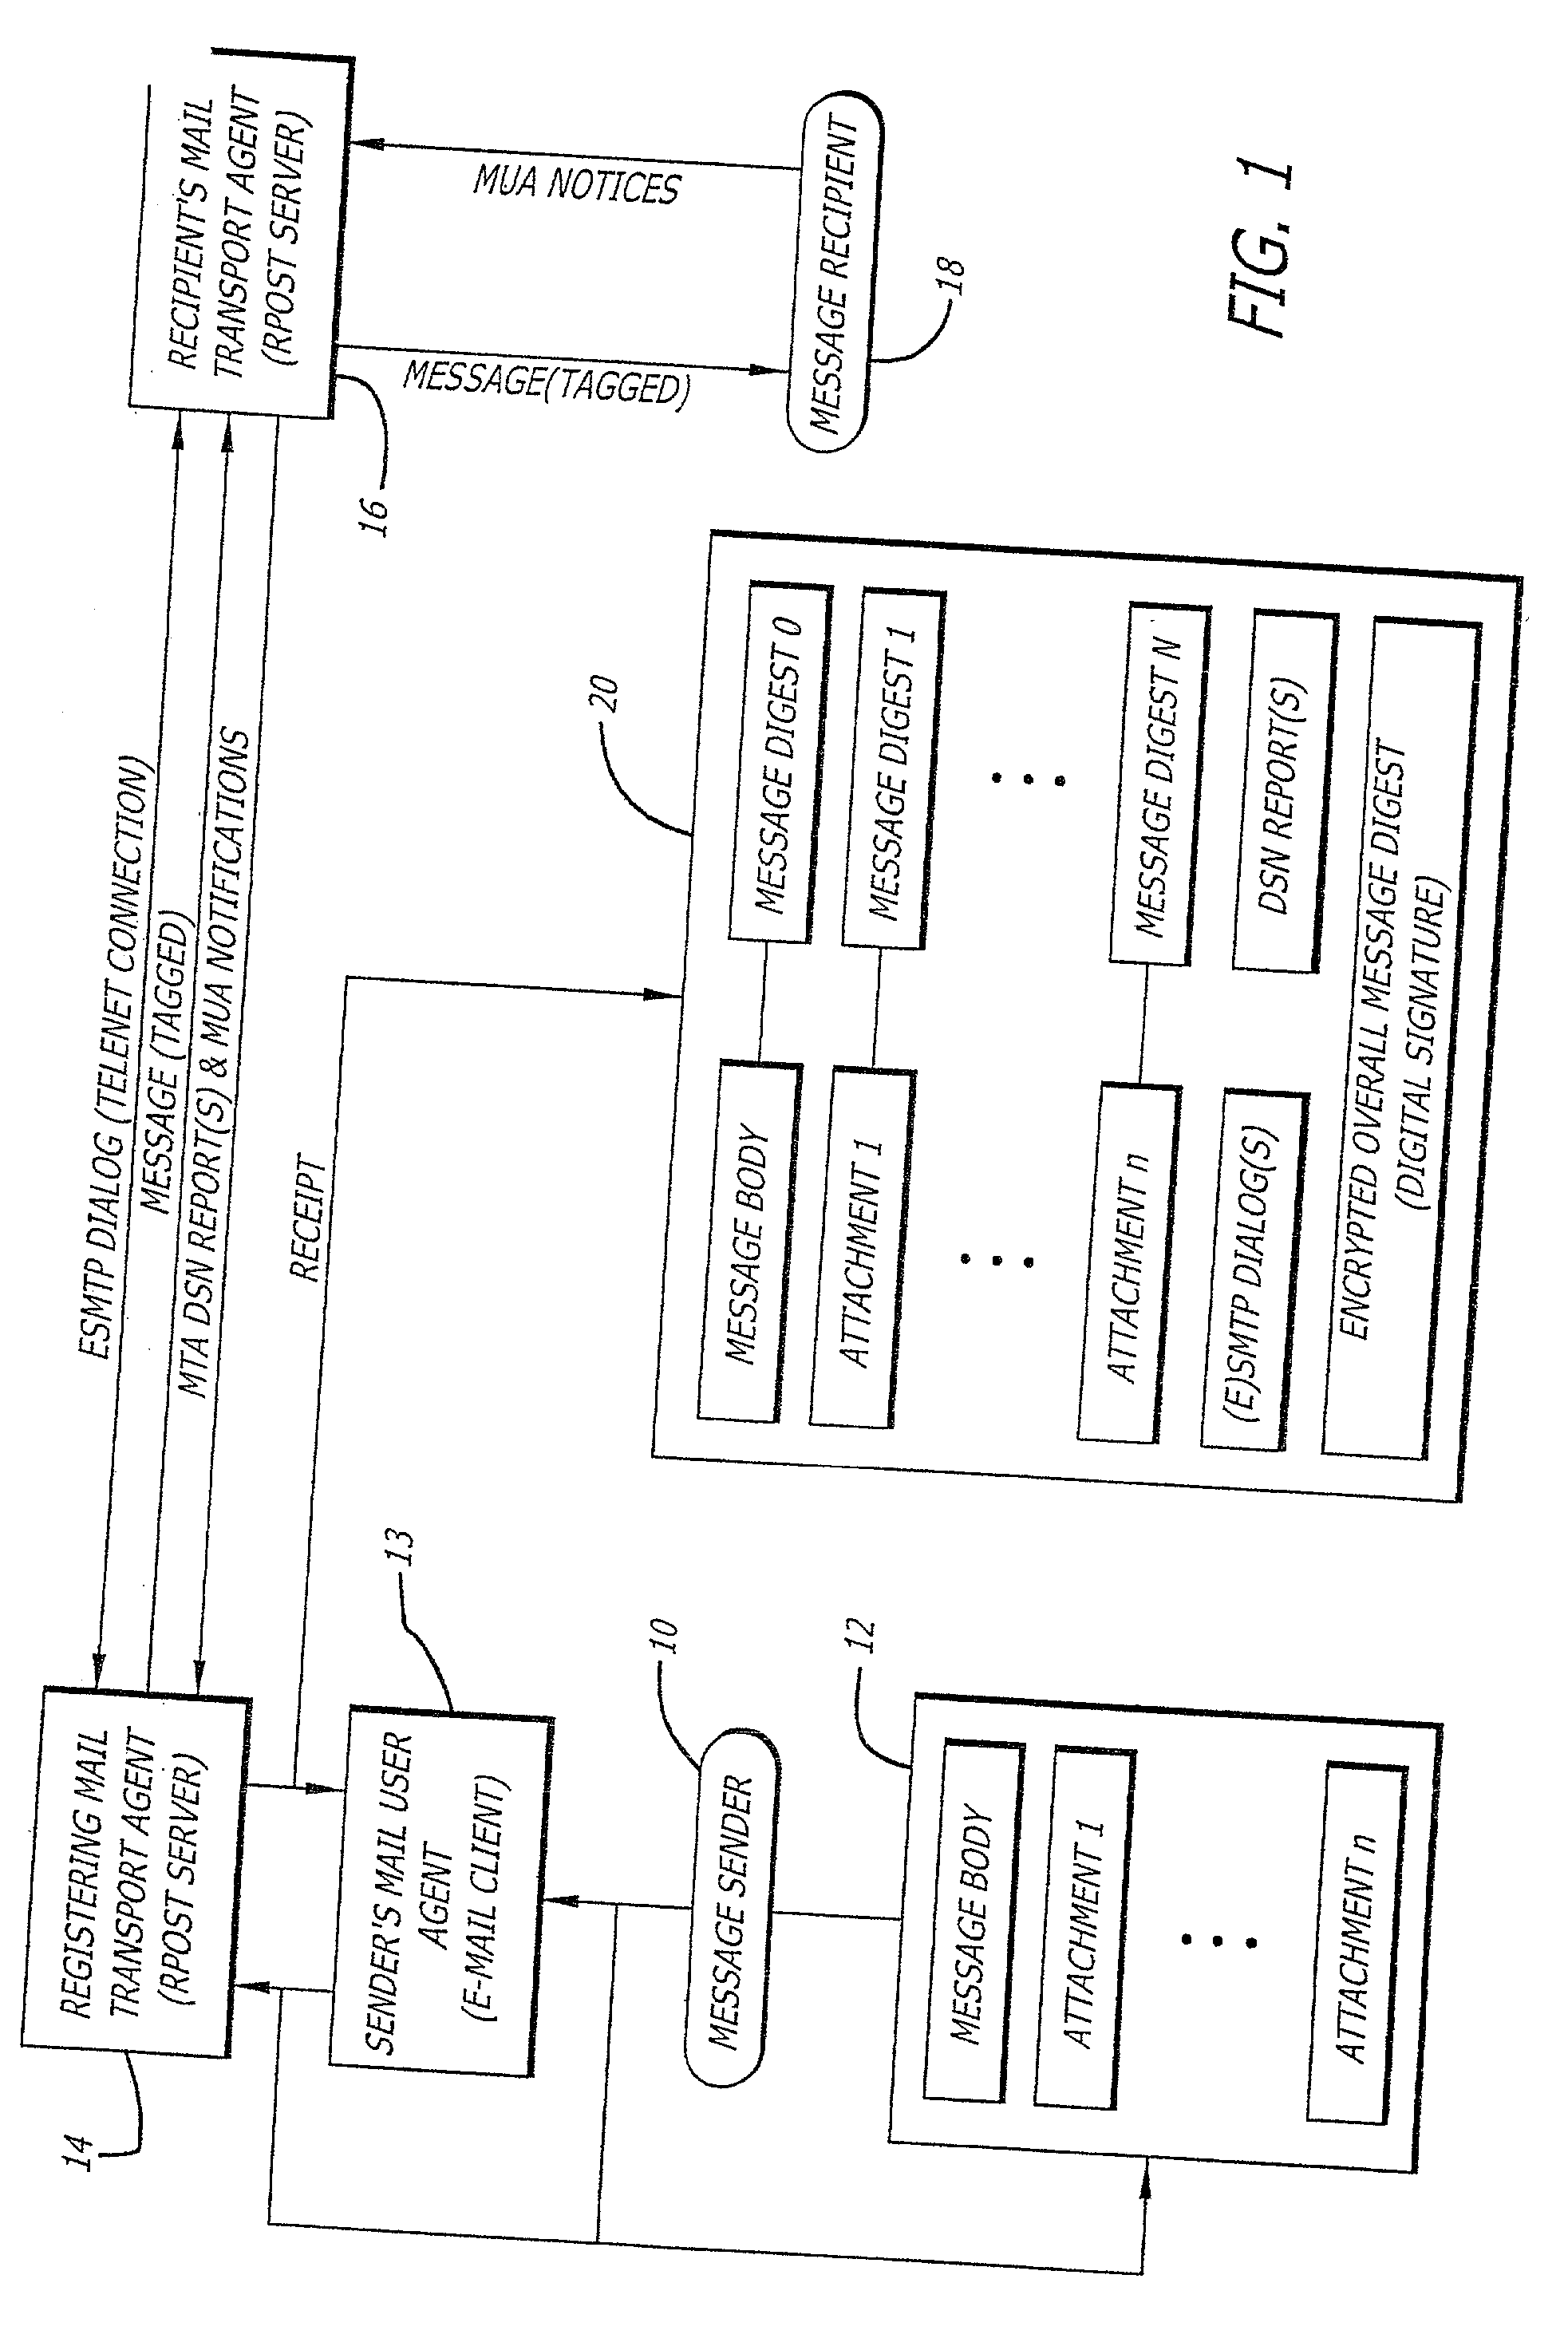 System and method for verifying delivery and integrity of electronic messages